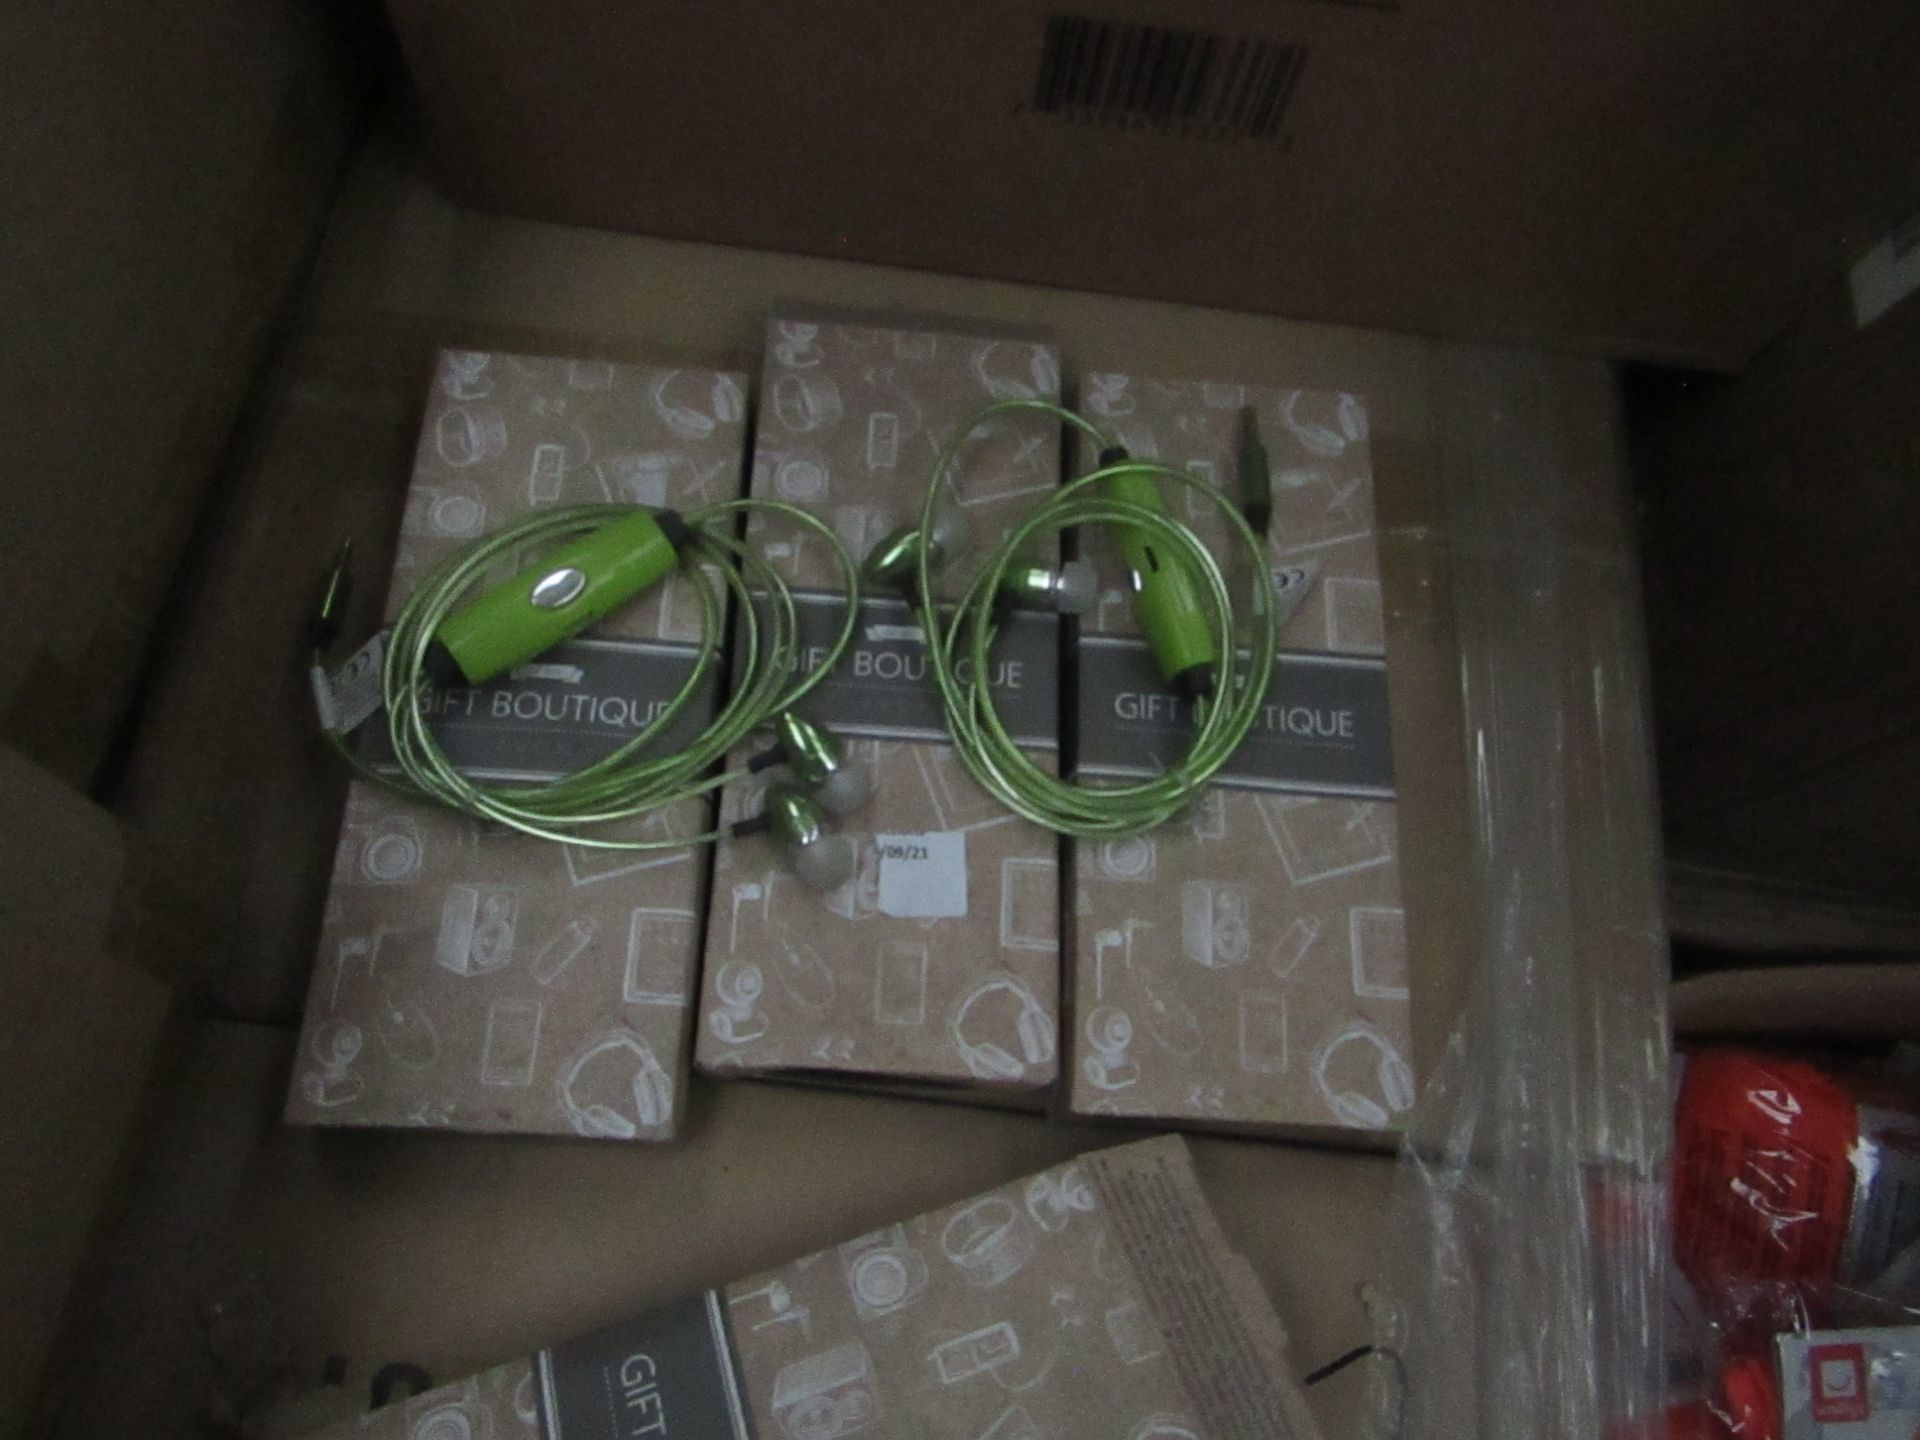 10x Avon - Gift Boutique Light Up Earphones - New & Boxed. RRP ?14.99 Each, we have spot checked a